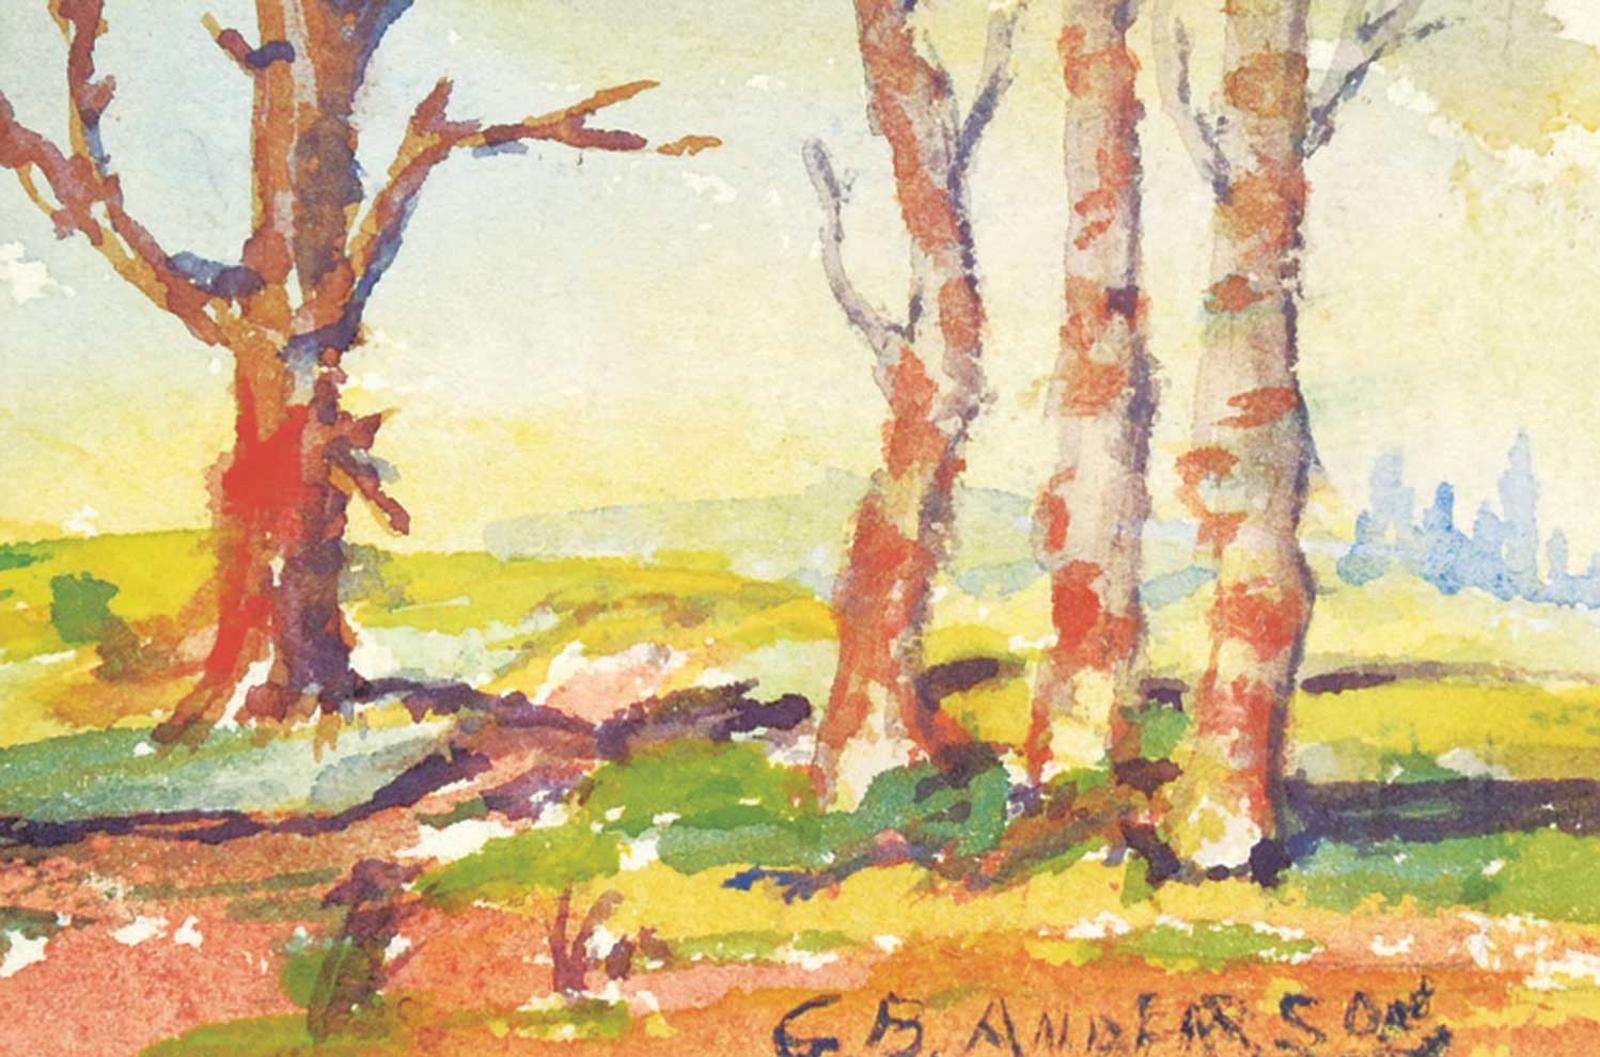 G.B. Anderson - Untitled - Trees